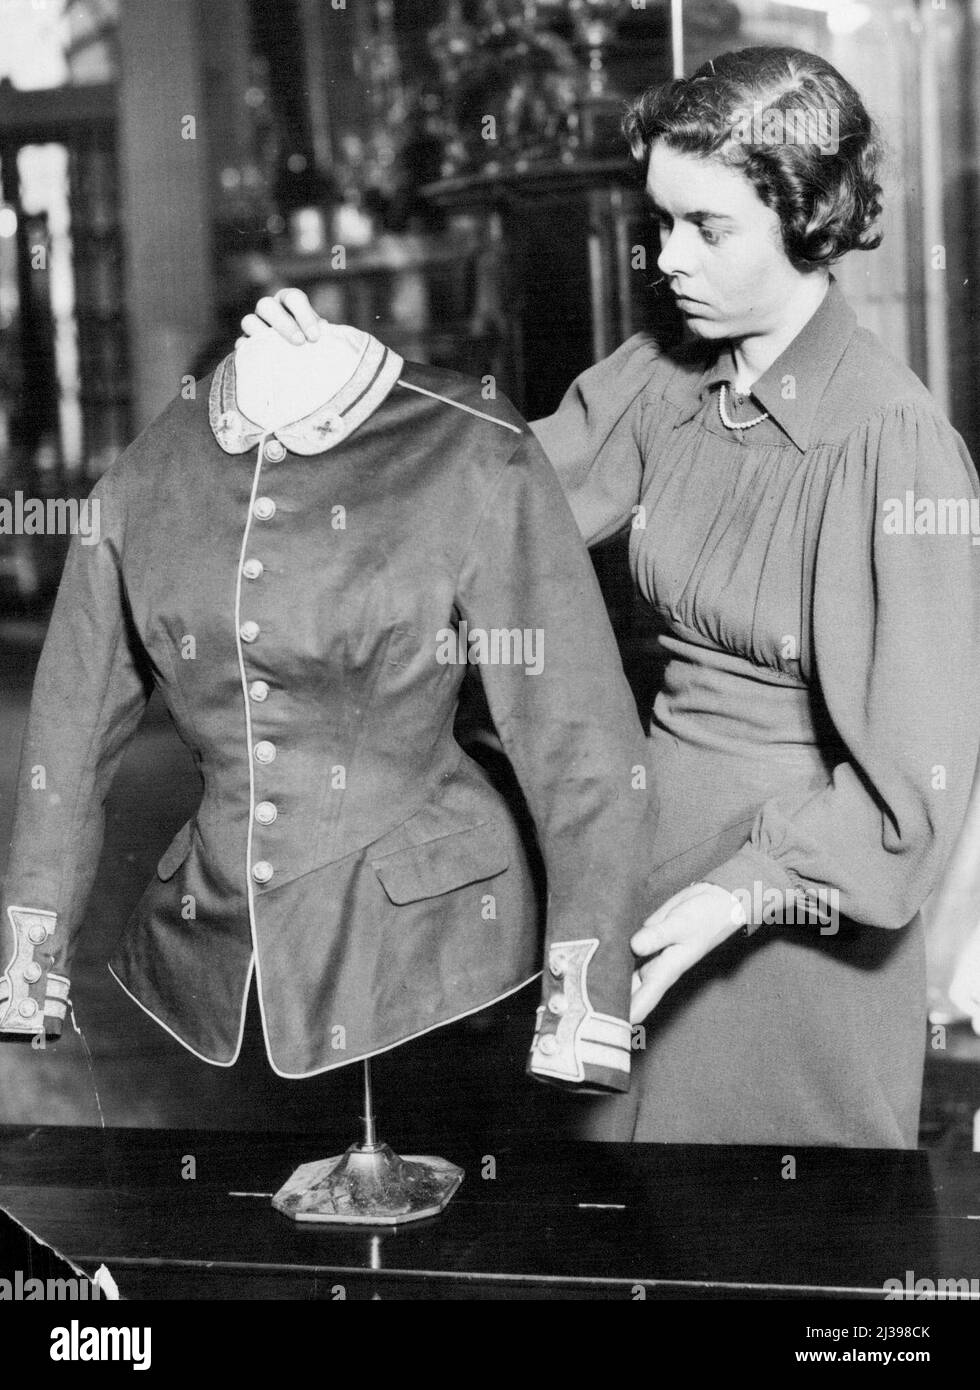 Royal treasures exhibition in aid of the Westminster hospital rebuilding fund, at great Stanhope street, Park Lane - The Queen has lent a military tunic which was always worn by Queen Victoria when she received troops. It is an exact replica, in scarlet cloth, of the military uniforms of the time. April 8, 1937. (Photo by Sport & General Press Agency Limited). Stock Photo